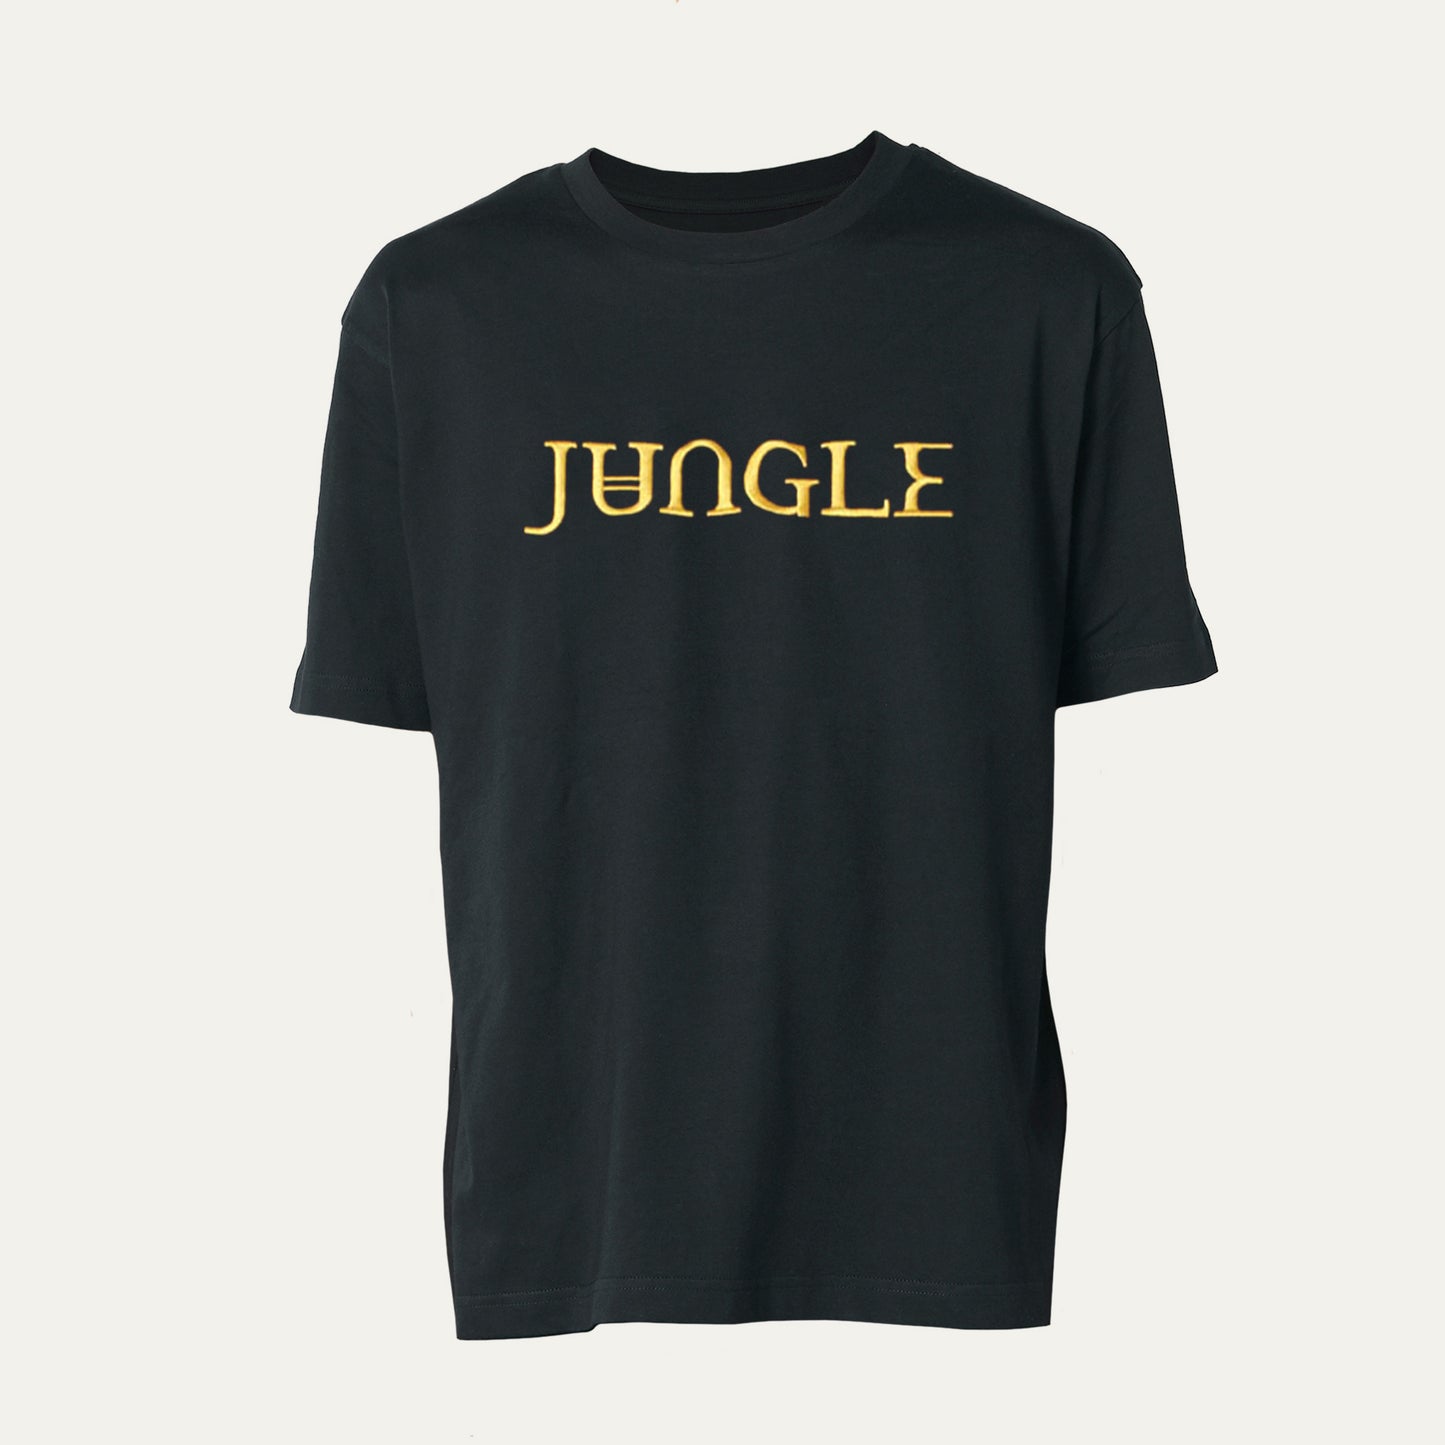 Black T-shirt with Gold Embroidered Jungle Logo